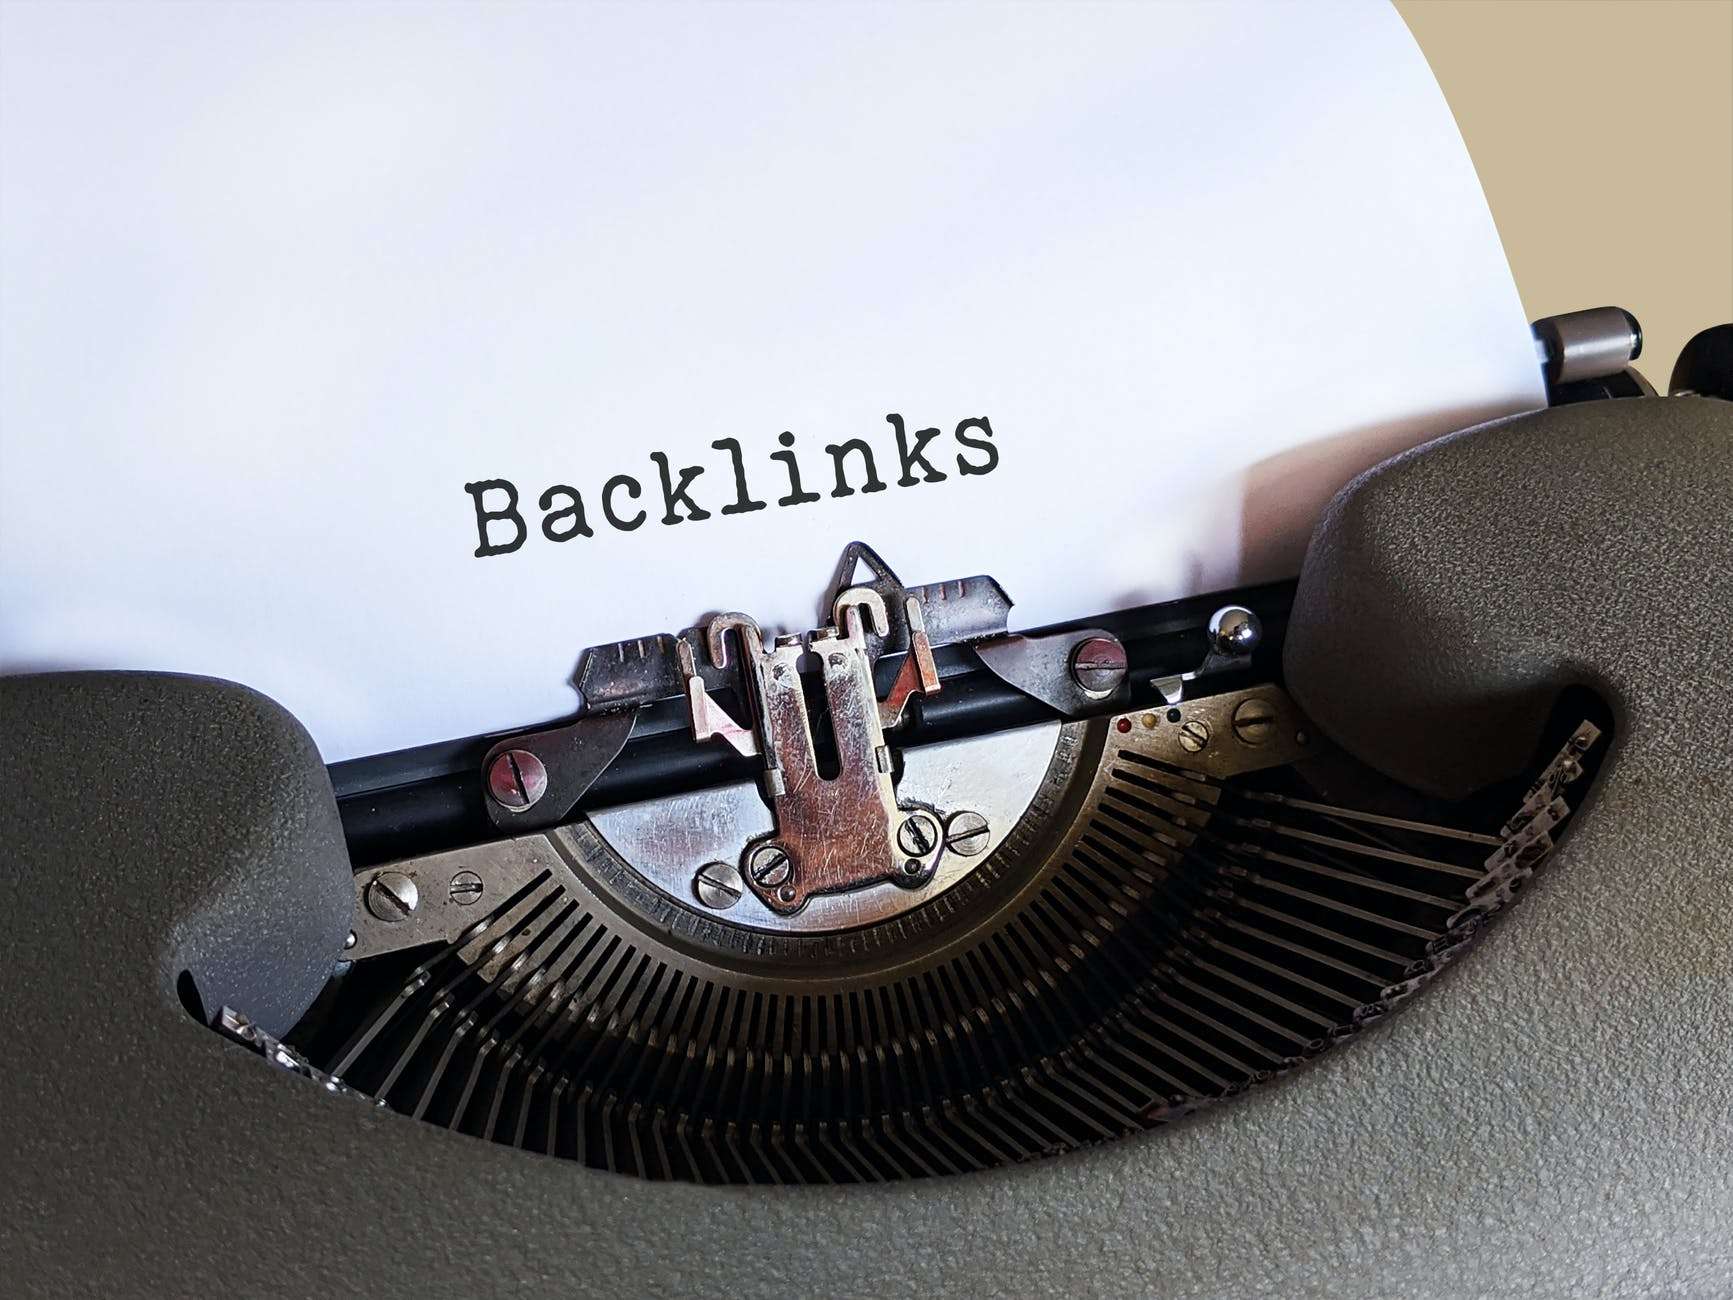 Why are Backlinks Important for Local SEO?